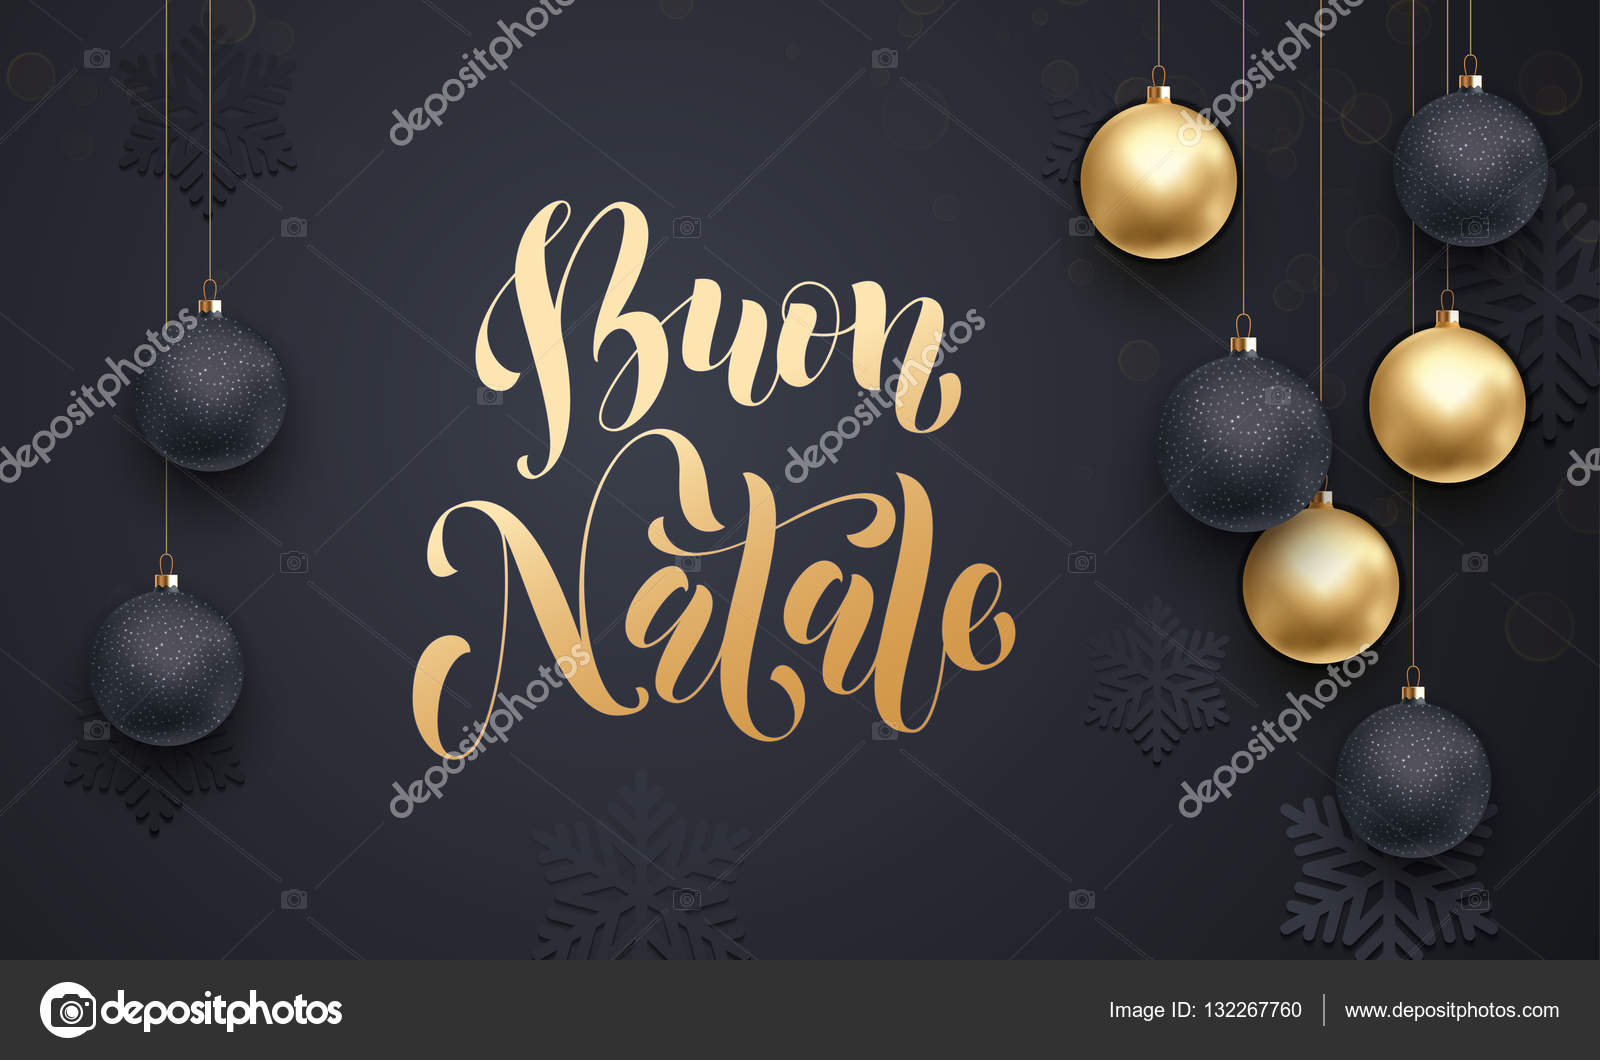 Buon Natale Ornament.Italian Merry Christmas Buon Natale Golden Decoration Calligraphy Lettering Stock Vector C Ronedale 132267760